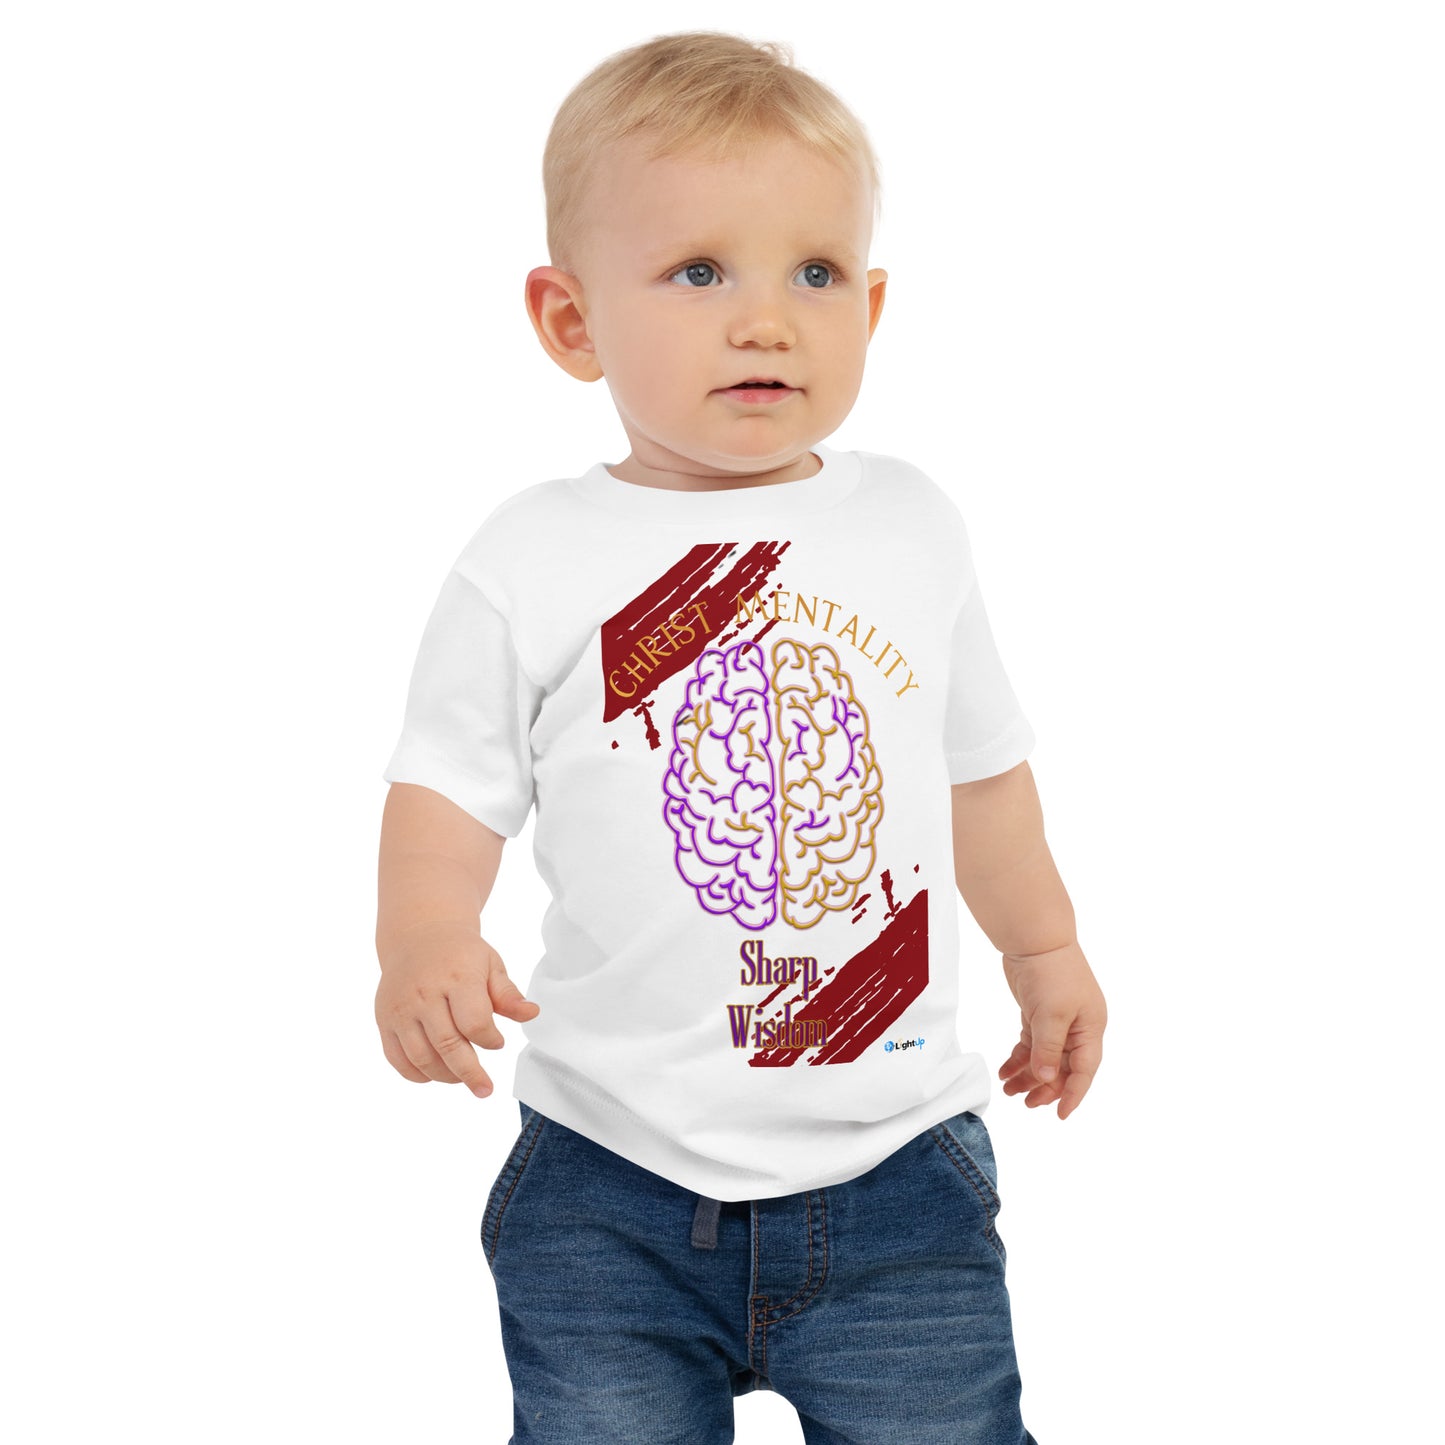 Snug 'n' Stylish Jersey Tee for Your Little Star!"